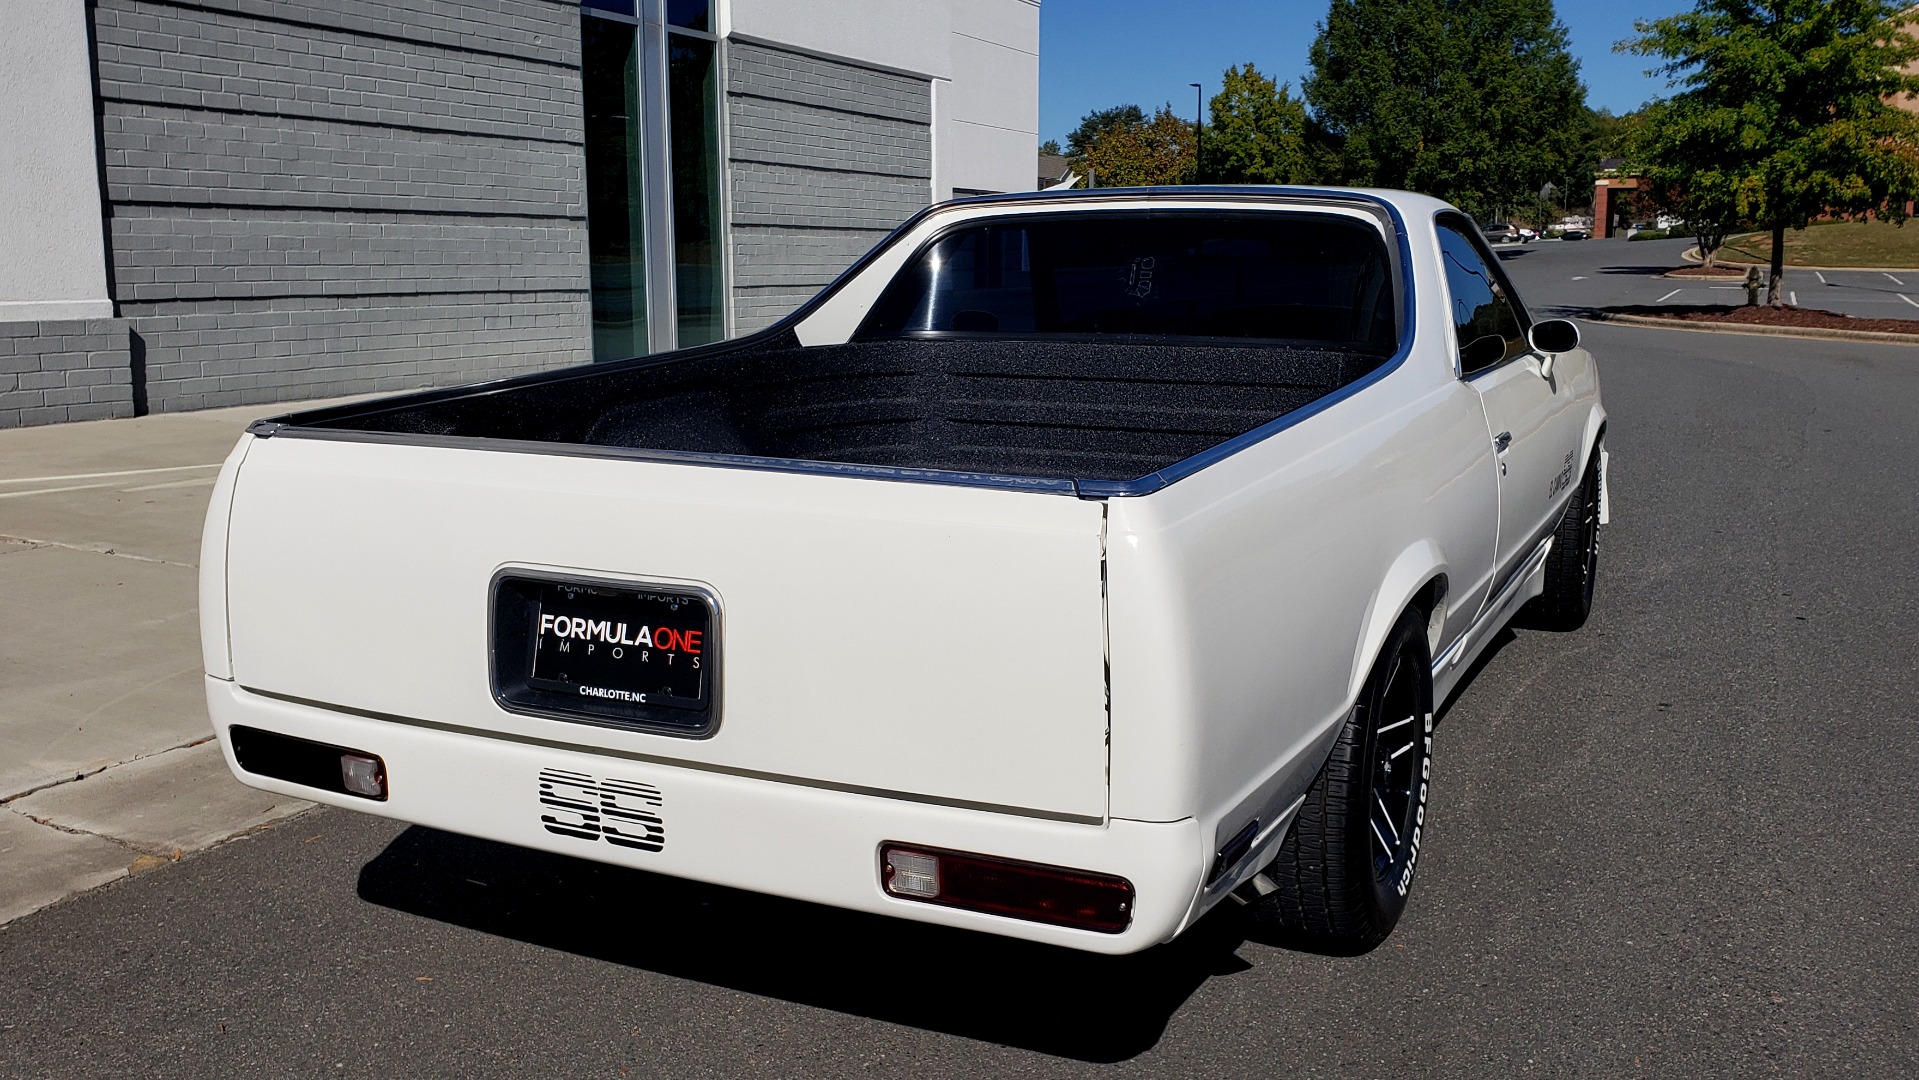 Used 1979 Chevrolet EL CAMINO SS / NEW 350 V8 / AUTO / COWL HOOD / CUSTOM SOUND / FLOWMASTERS for sale Sold at Formula Imports in Charlotte NC 28227 13